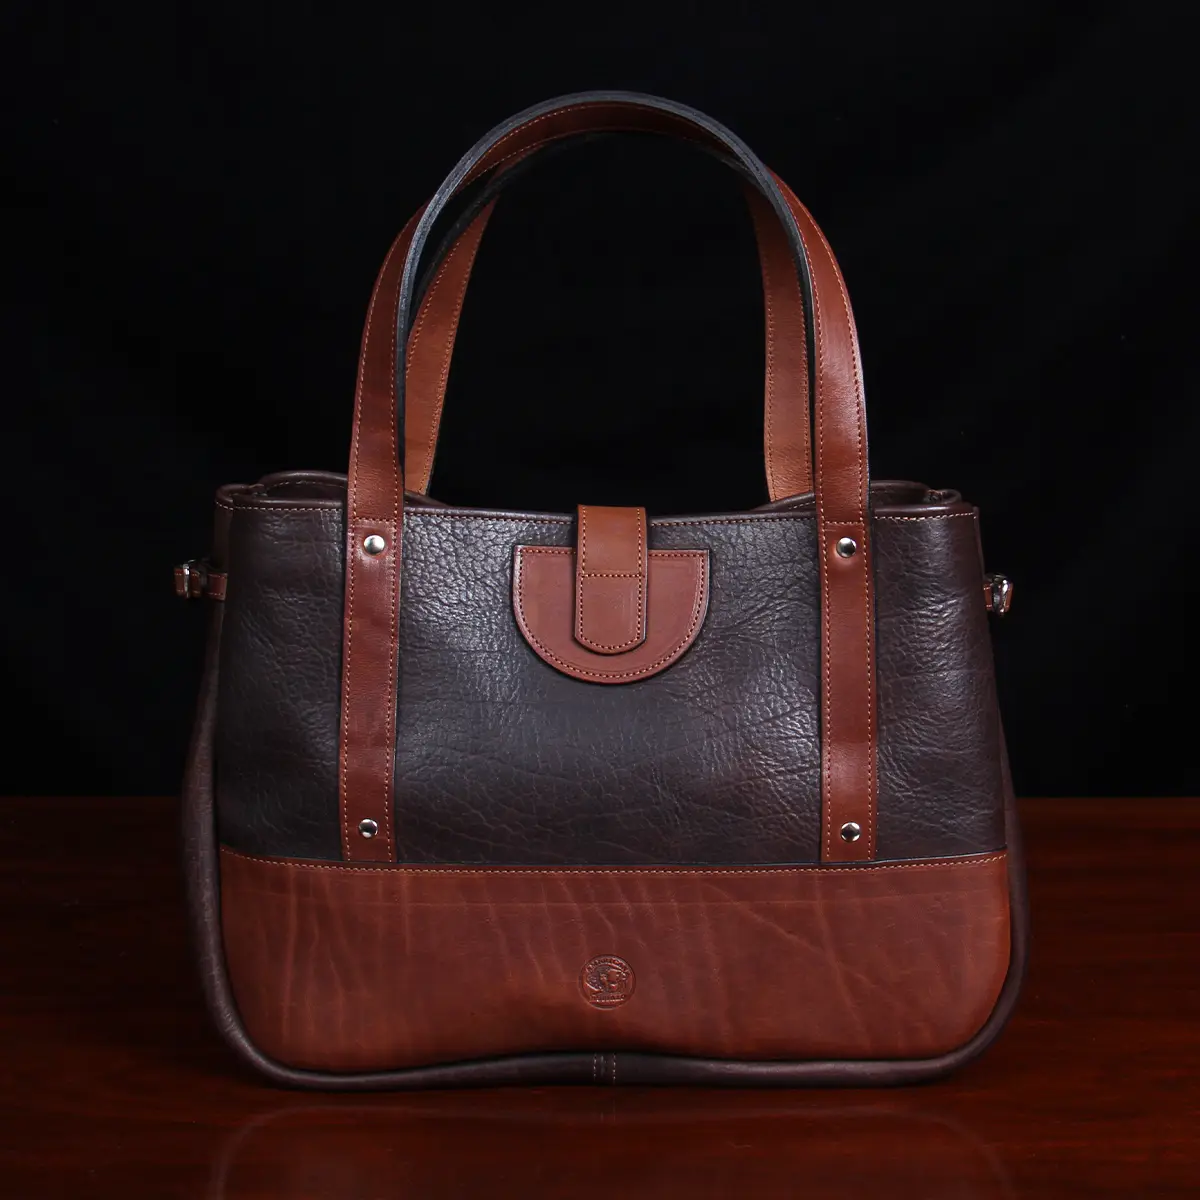 Leather Document Bag with Strap, No. 16 - Business Bag - Soft, Full-Grain Brown American Steerhide Leather - USA Made by Col. Littleton, 16 3/4 x 12